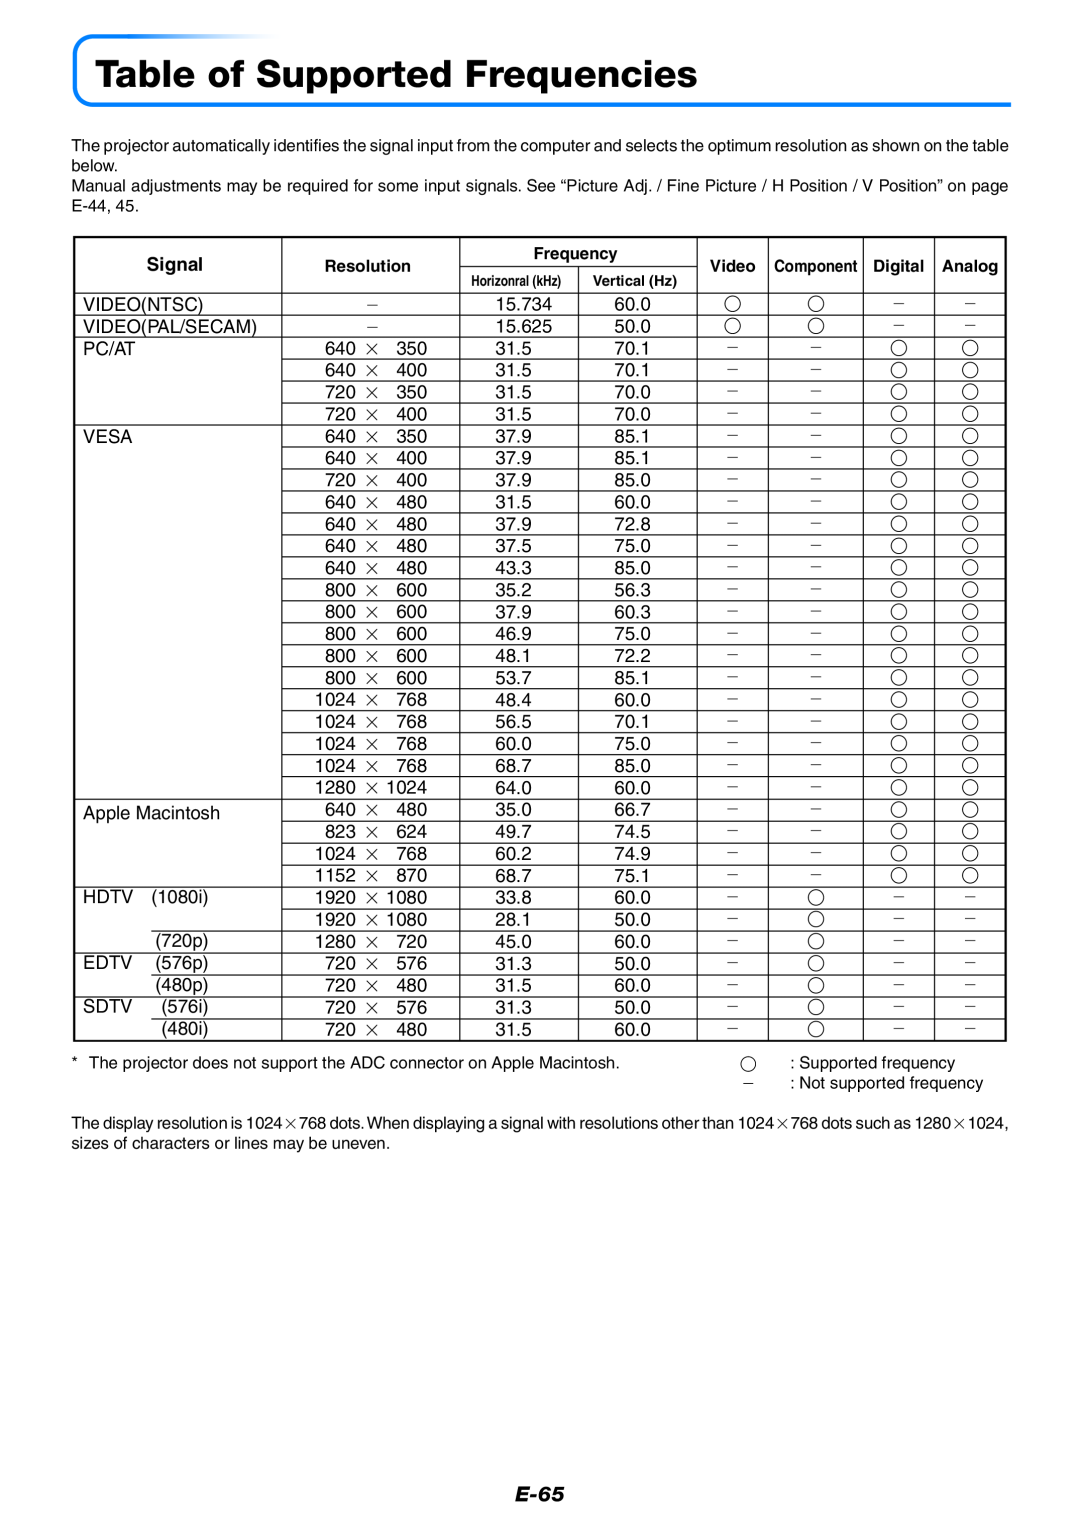 PLUS Vision U7-132h, U7-137 user manual Table of Supported Frequencies, E-65, Signal 